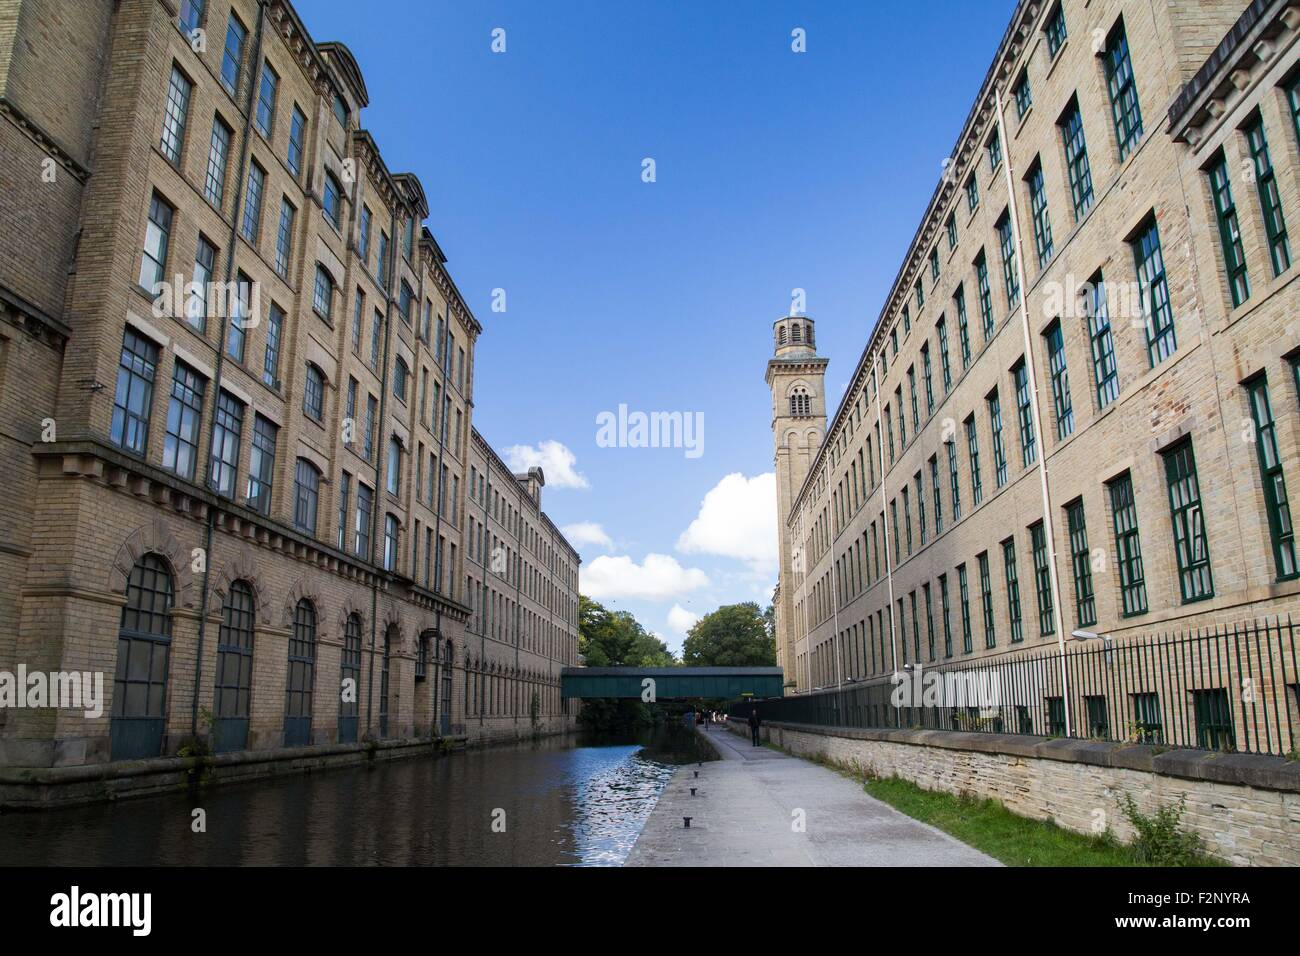 Salts Mill in Saltaire, Bradford, West Yorkshire, England.  Ian Hinchliffe / Alamy Stock Photo